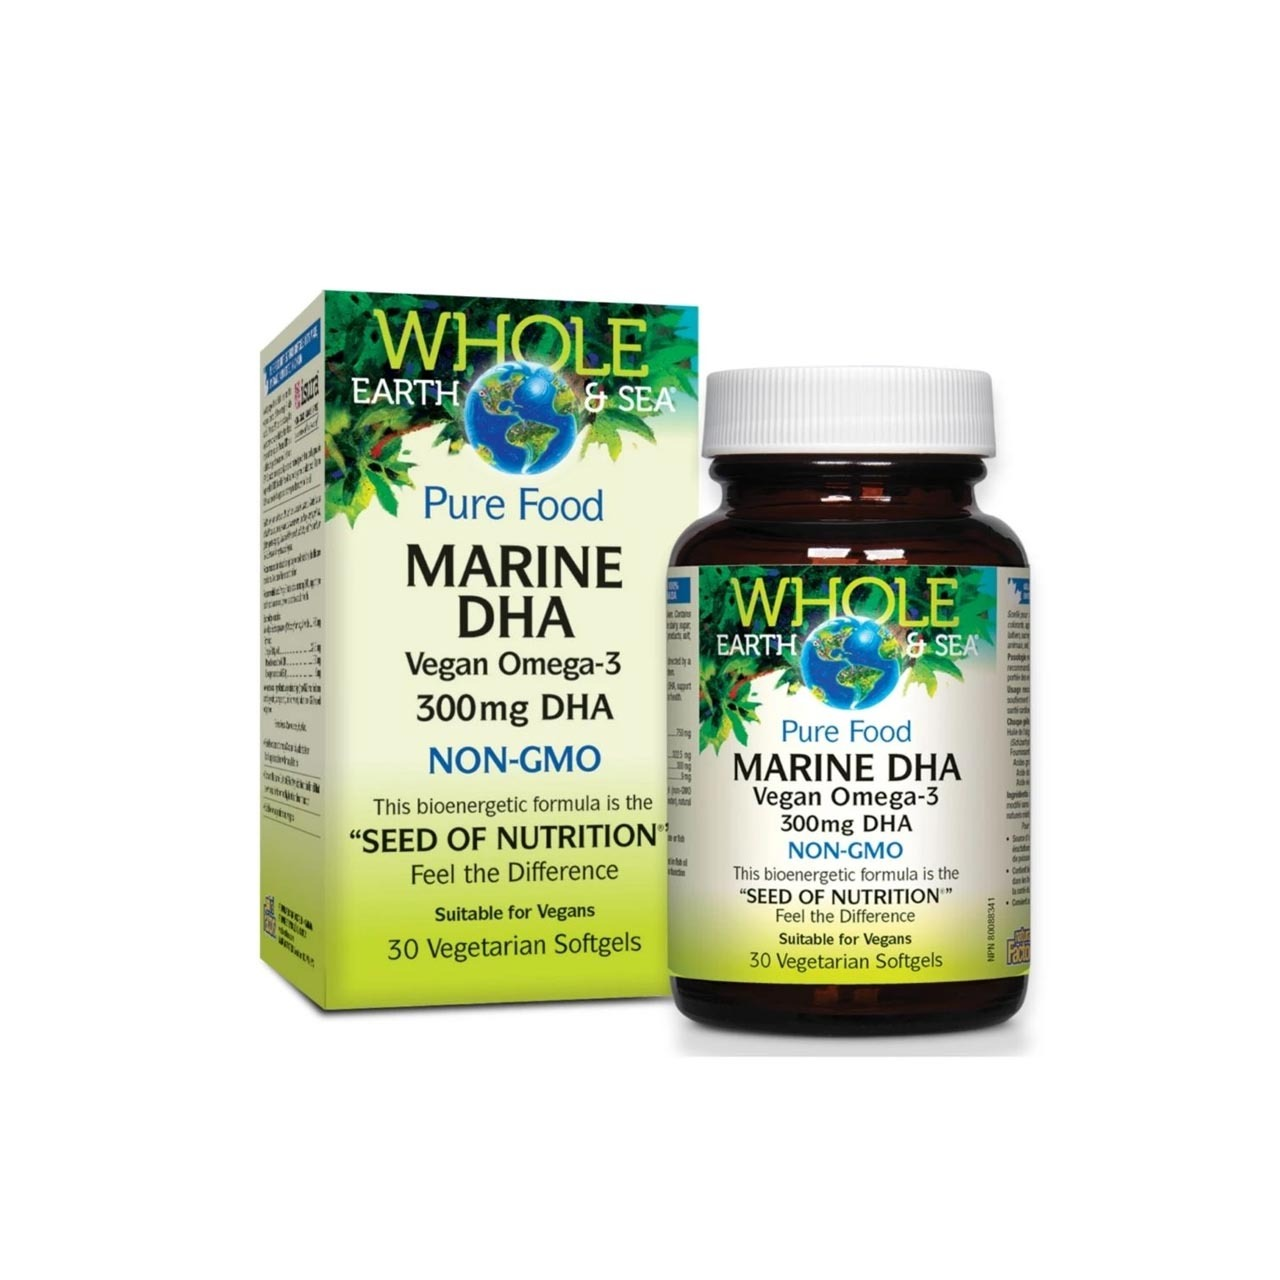 Whole Earth and Sea Marine DHA Supplement